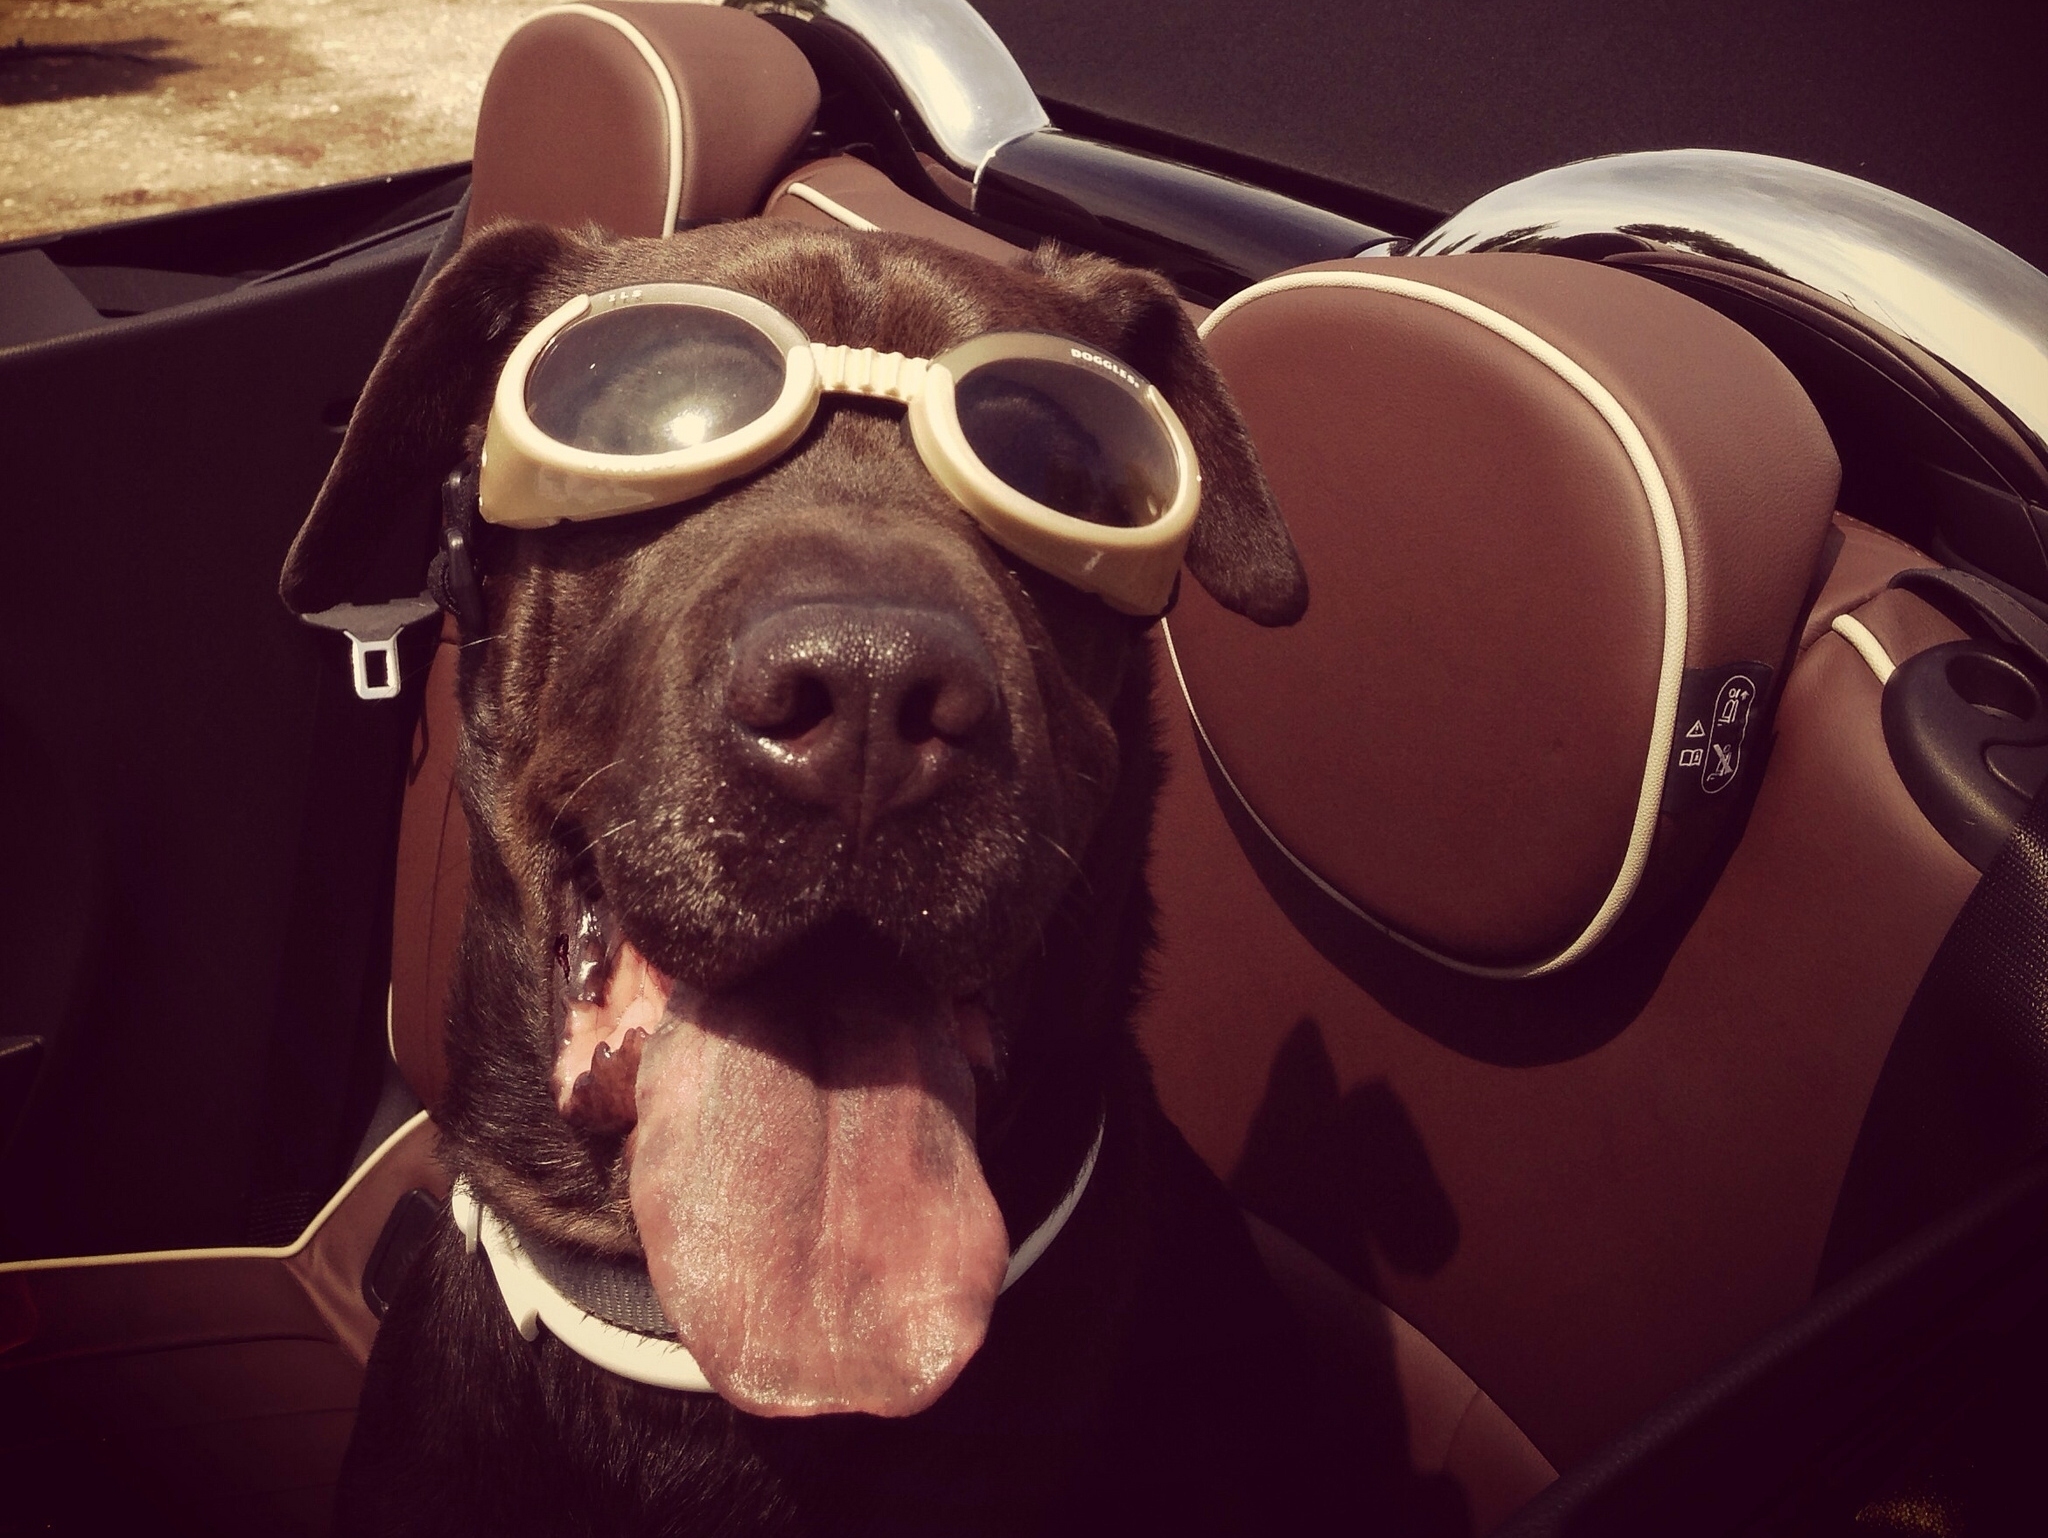 dogs, Glasses, Snout, Animals, Glasses, Humor, Funny Wallpaper